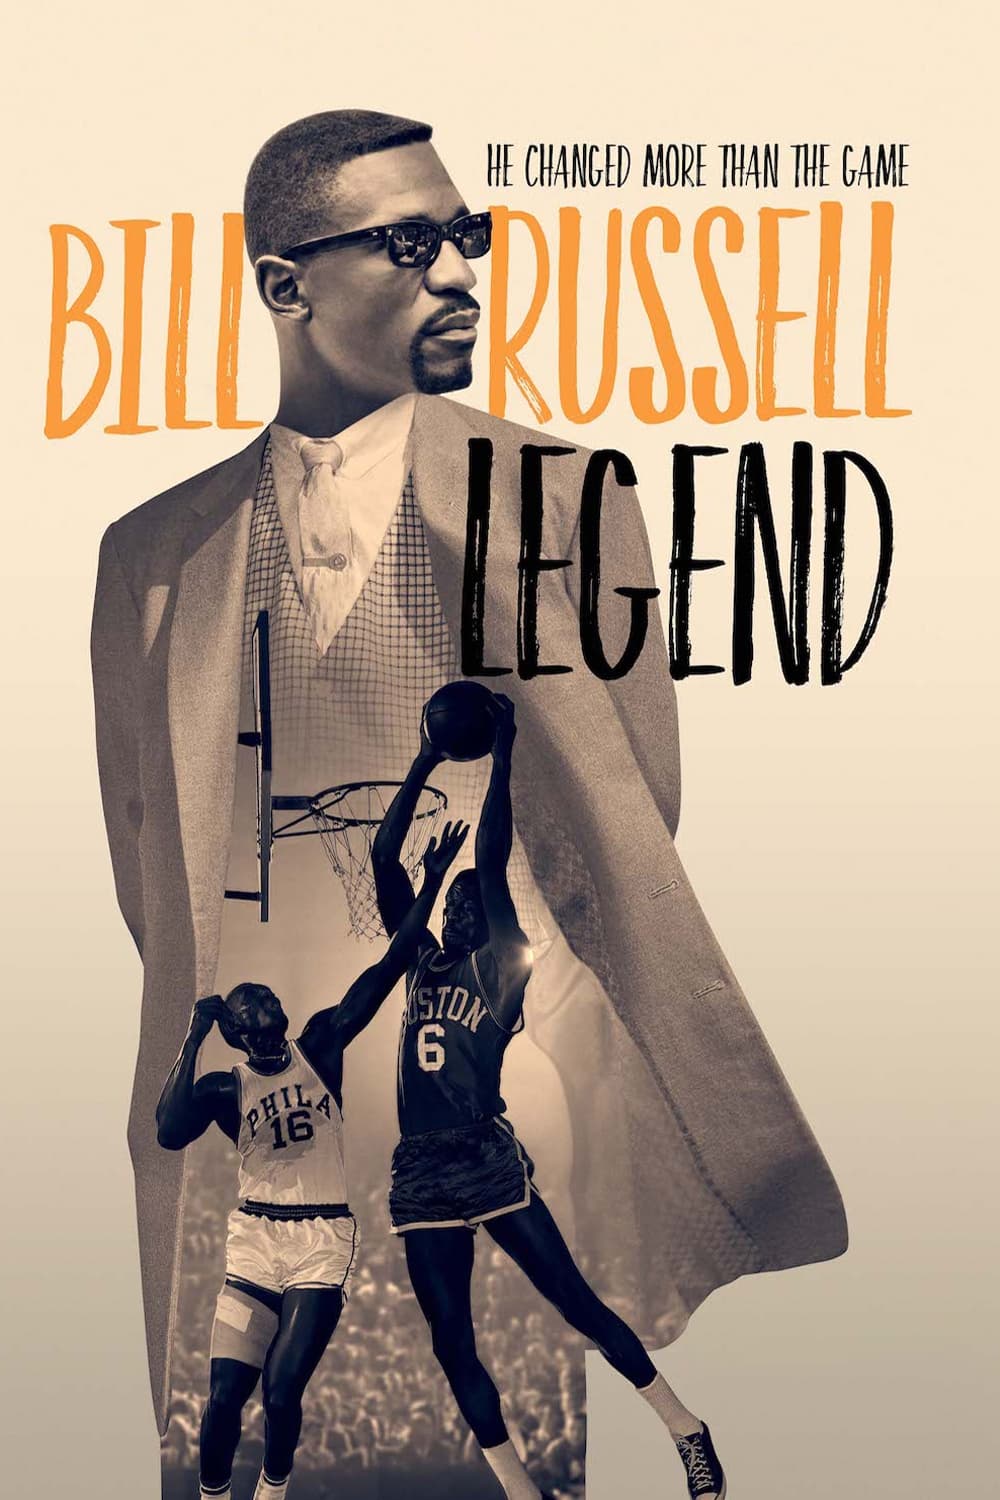 Bill Russell: Legend TV Shows About Human Rights